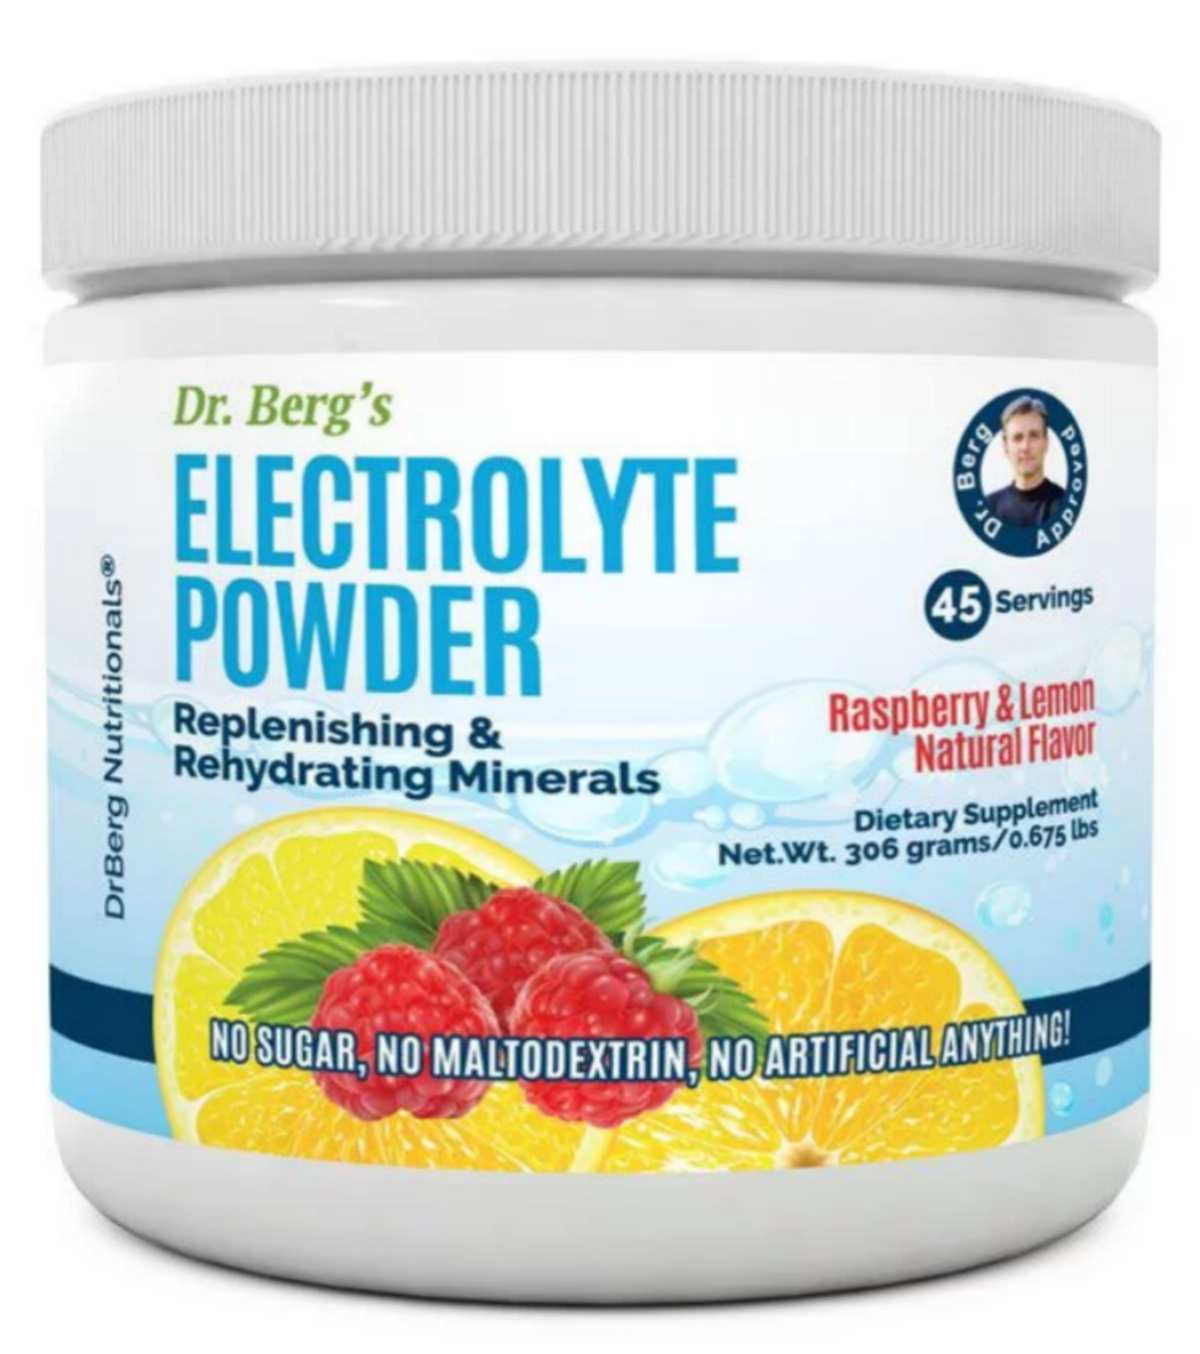 Dr. Berg's Electrolyte Powder | Road Trip Food: Eating While Traveling on Keto Diet